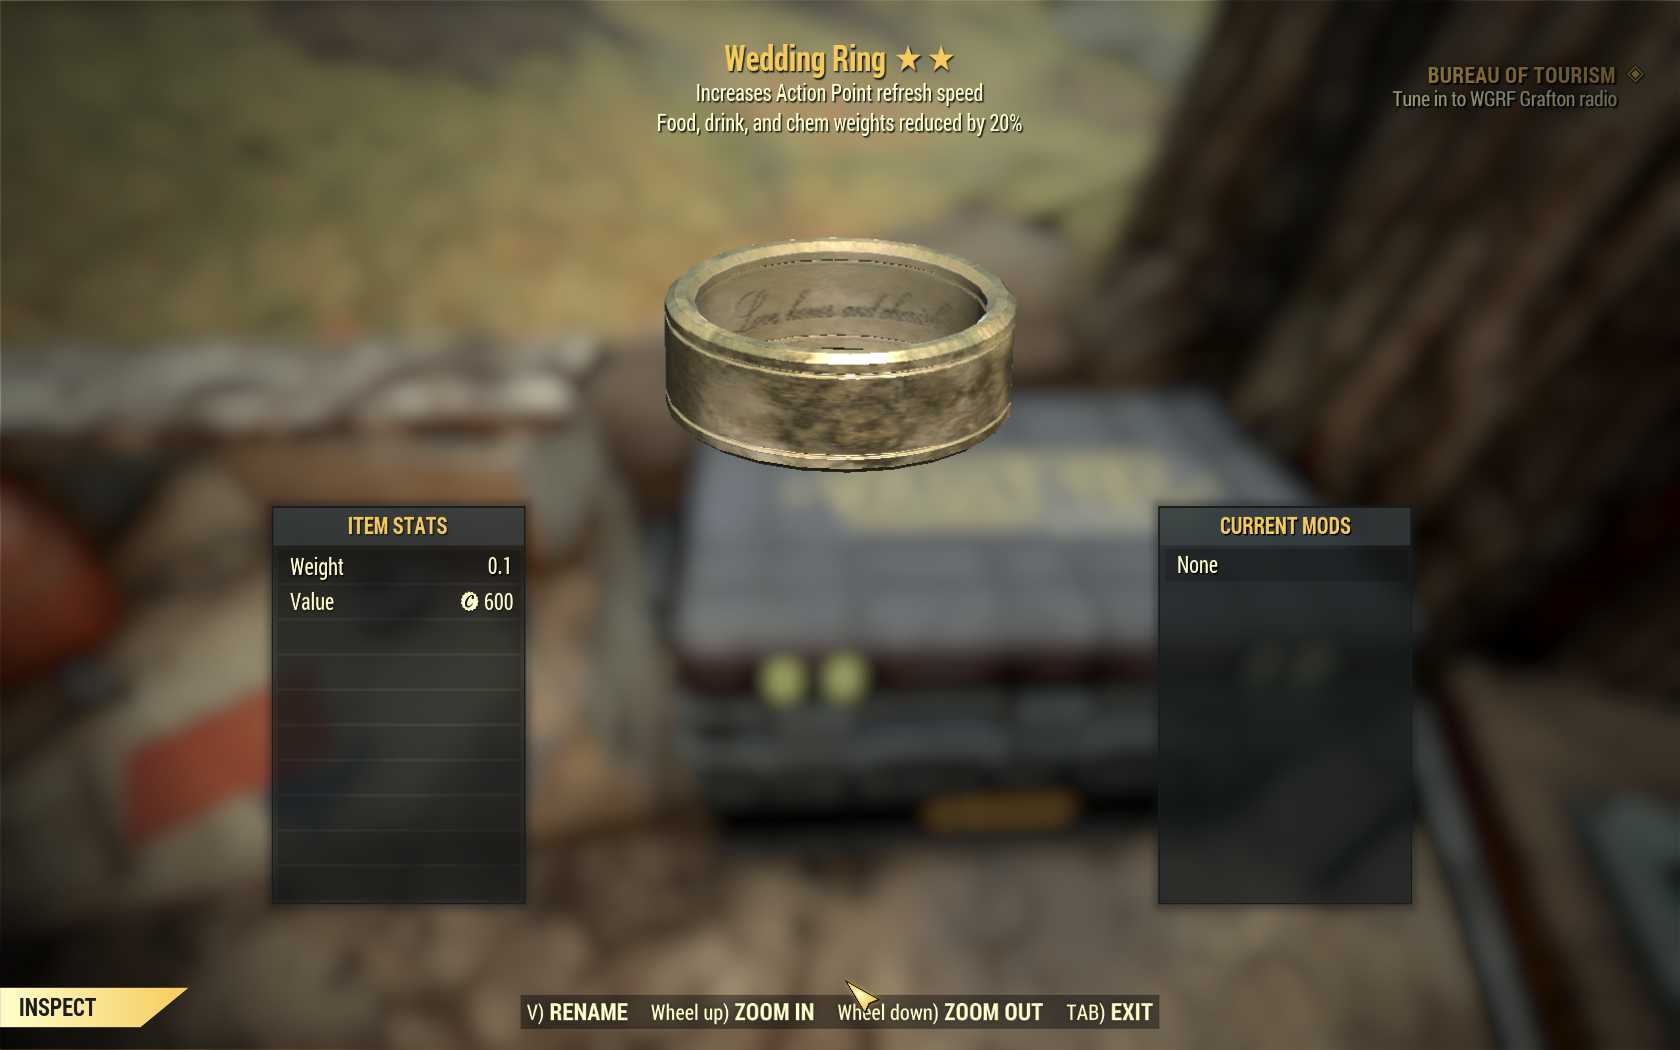 [AP FDCWR] Food Drink Chem Weight Reduction Wedding Ring (AP REFRESH) [Legendary outfit]